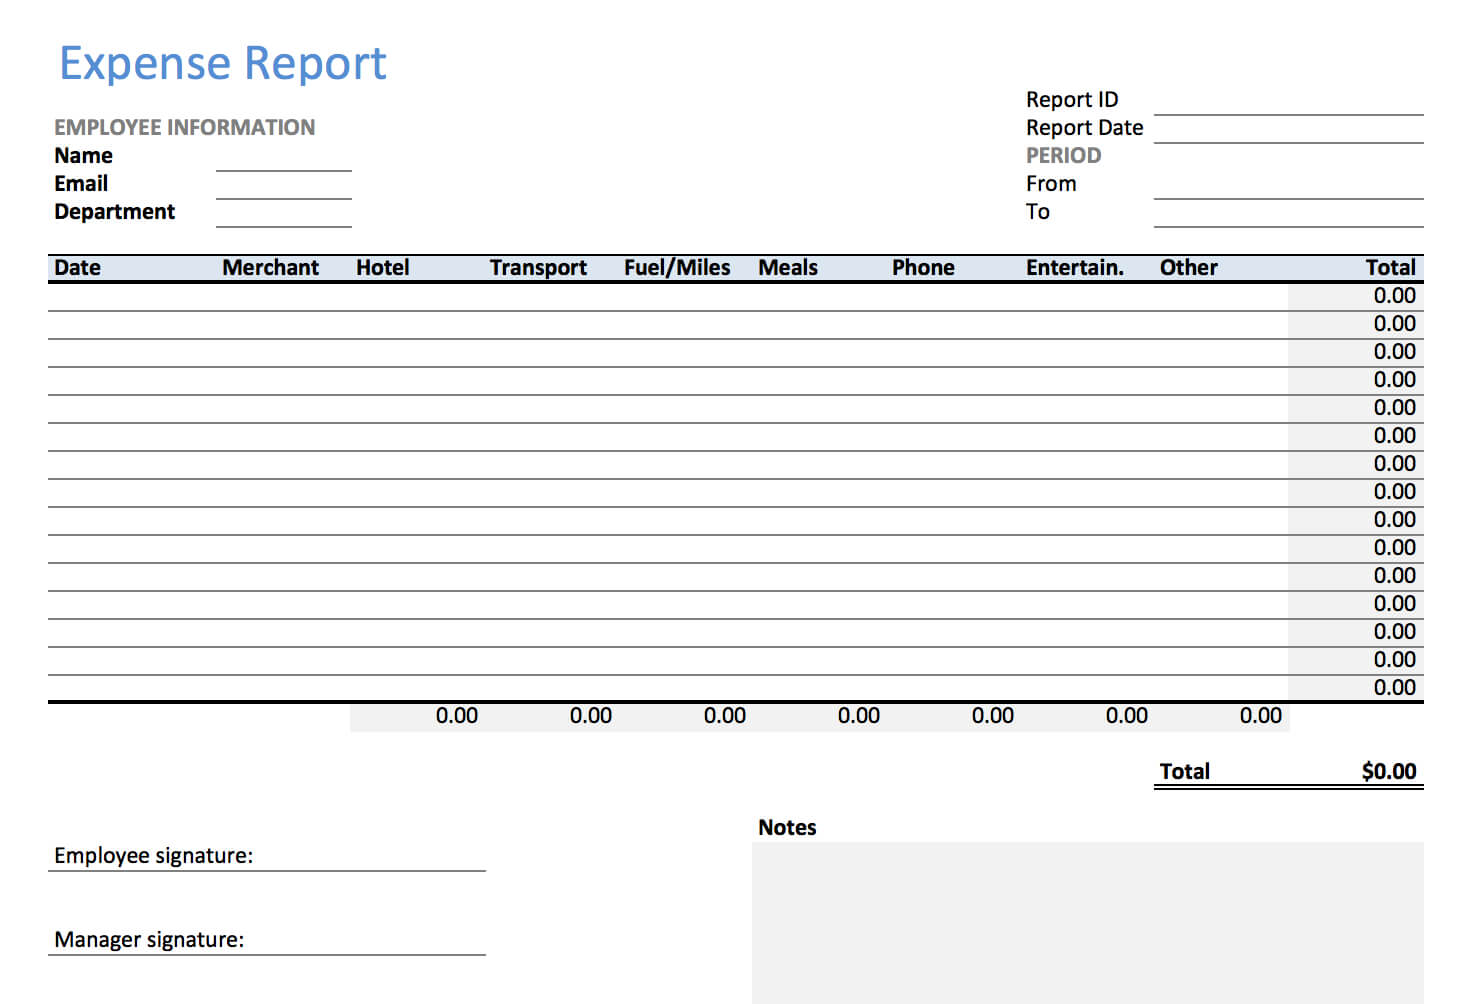 012 Template Ideas Excel Expense Report Awful Business For Monthly Expense Report Template Excel